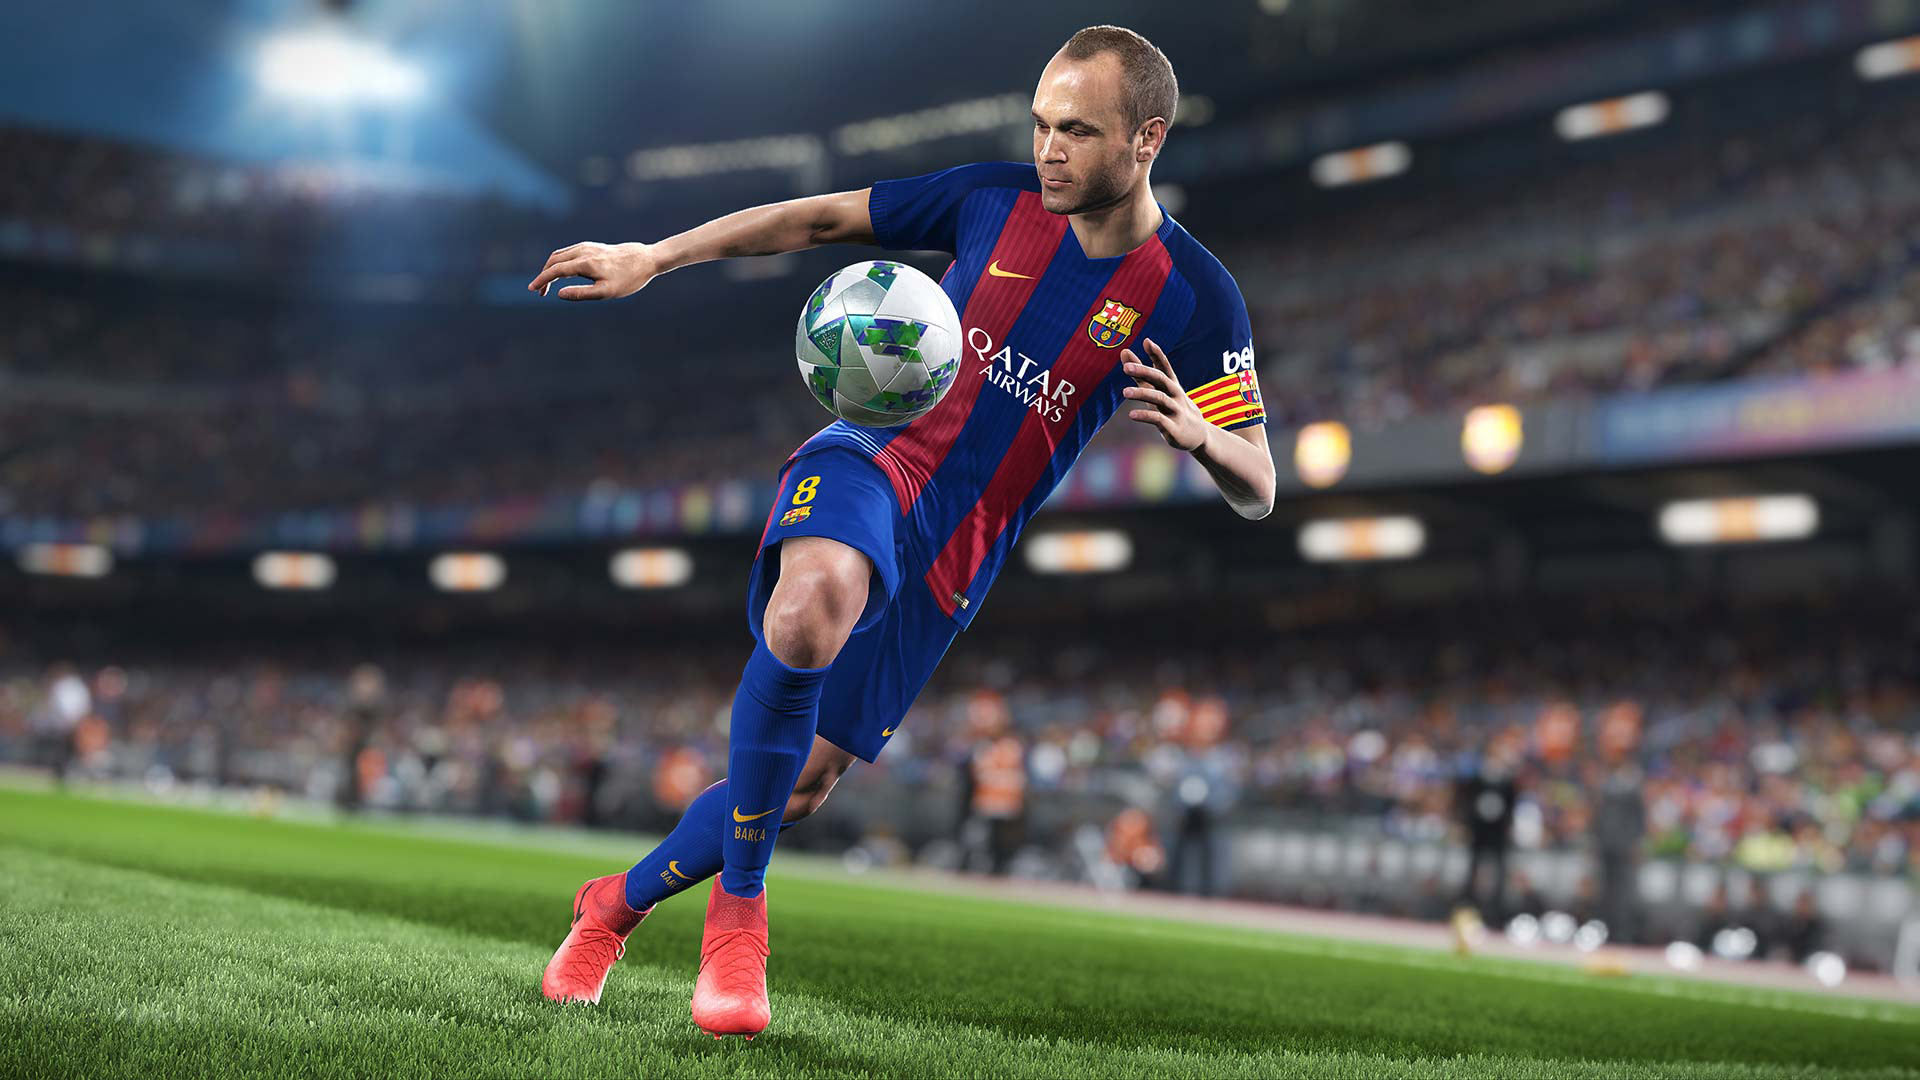 PRO EVOLUTION SOCCER 2018 System Requirements - Can I Run It? -  PCGameBenchmark